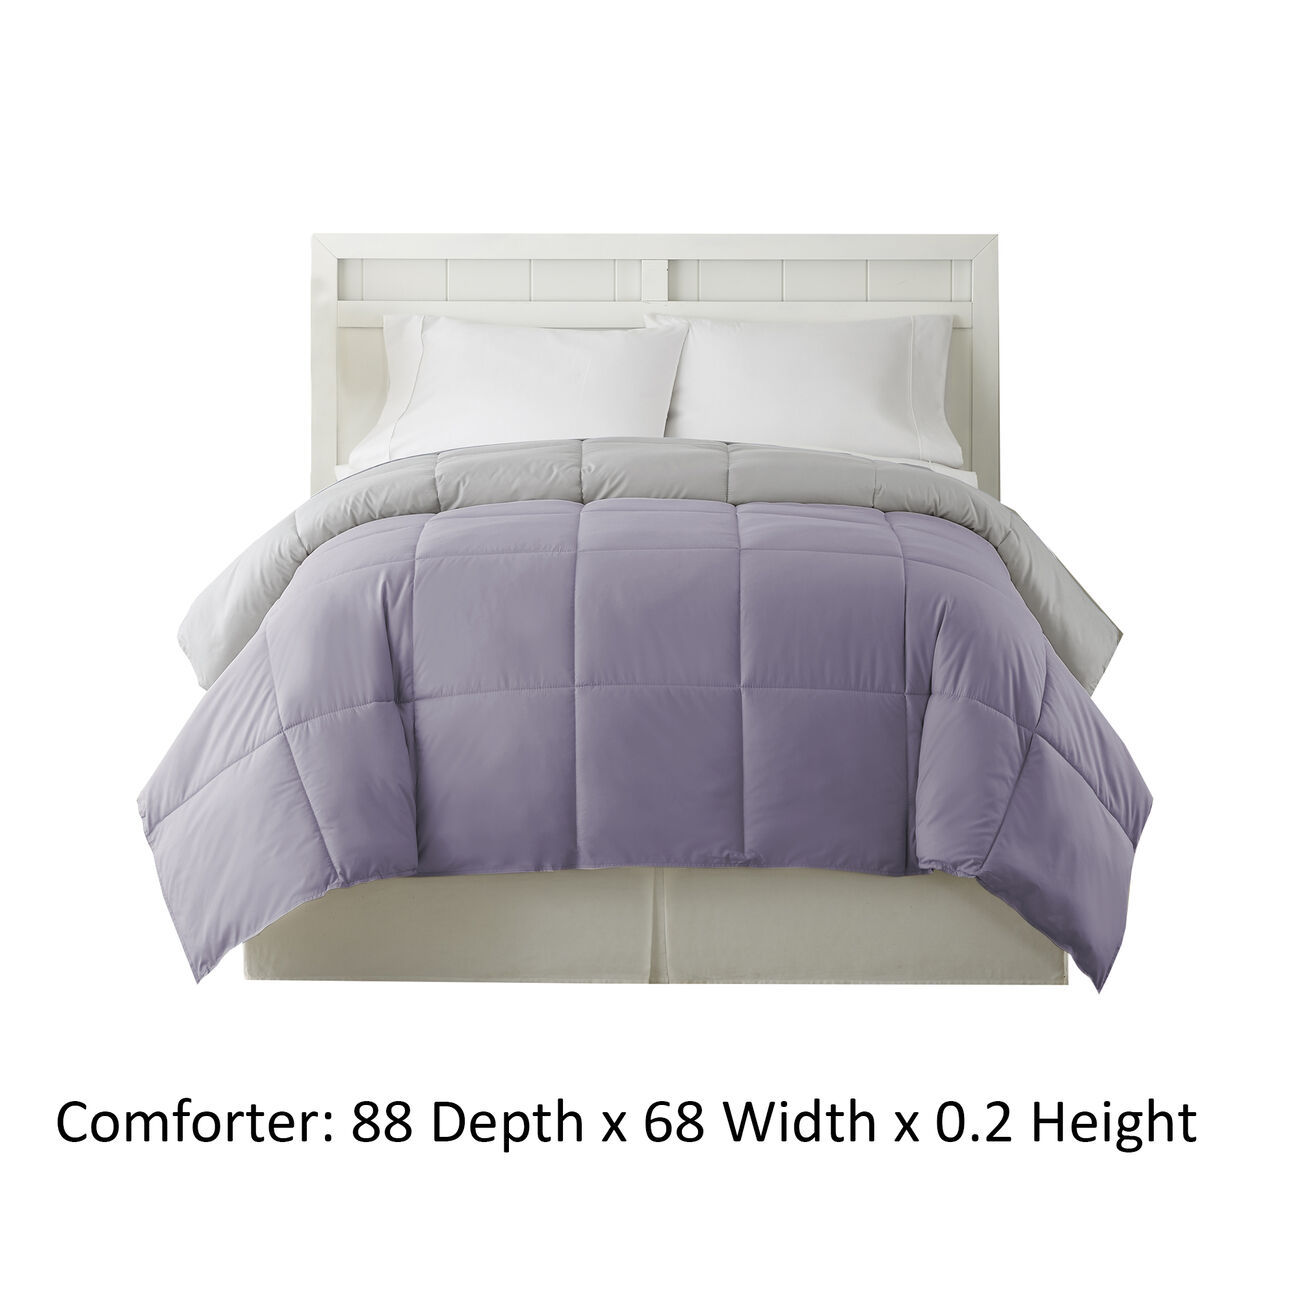 Genoa Twin Size Box Quilted Reversible Comforter The Urban Port, Purple and Gray